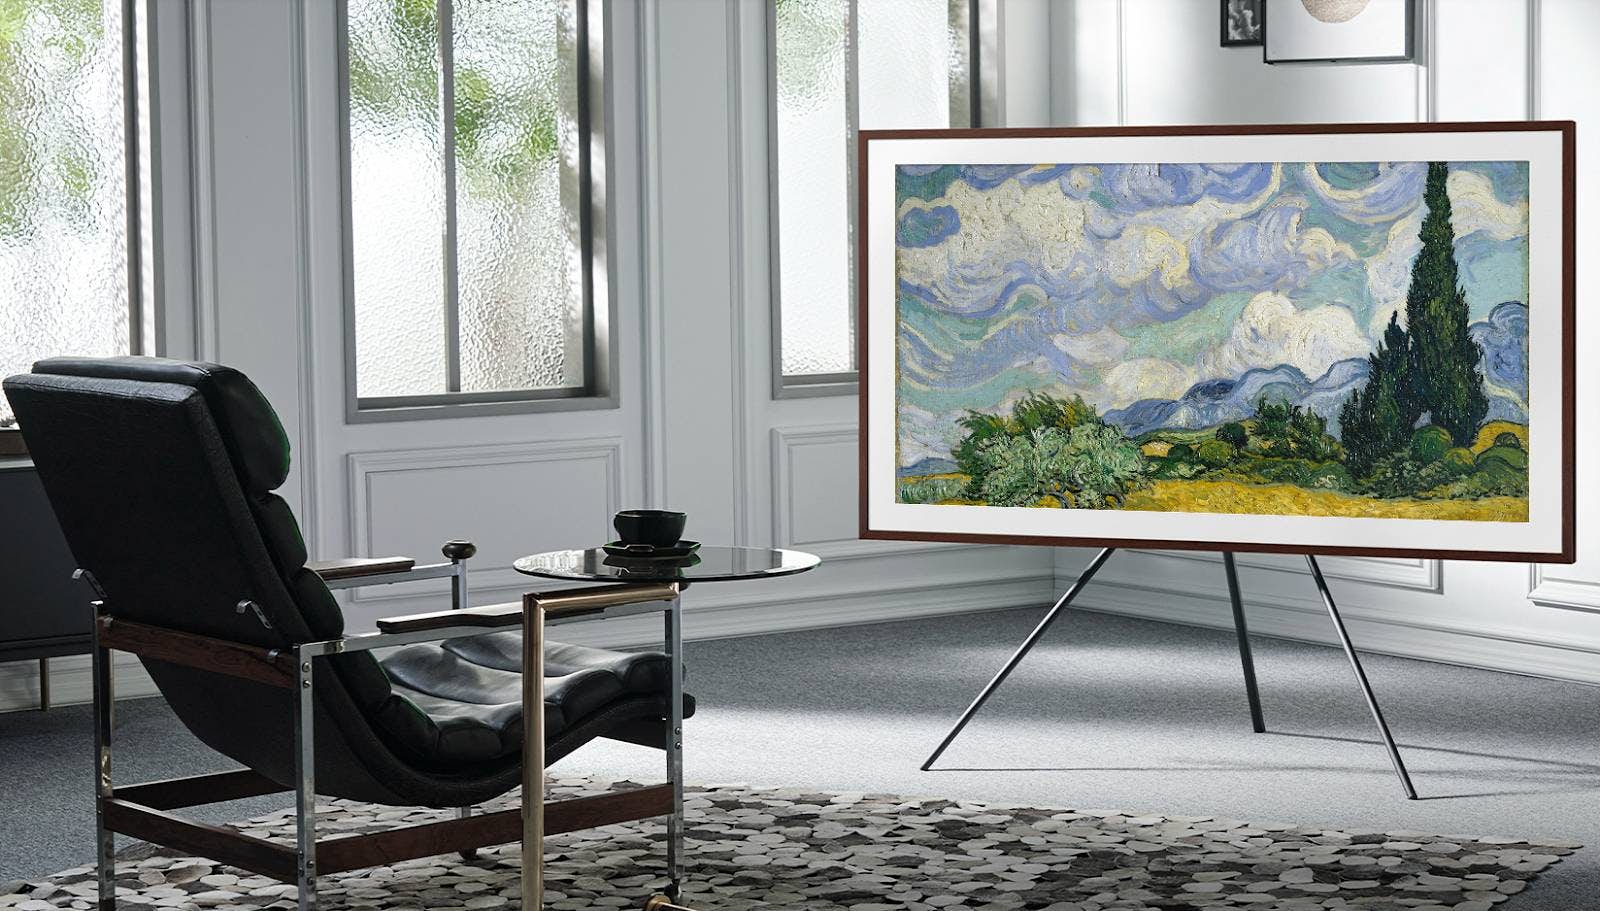  A Samsung television with an image of a painting on its screen that is part of a licensing deal with the Met.